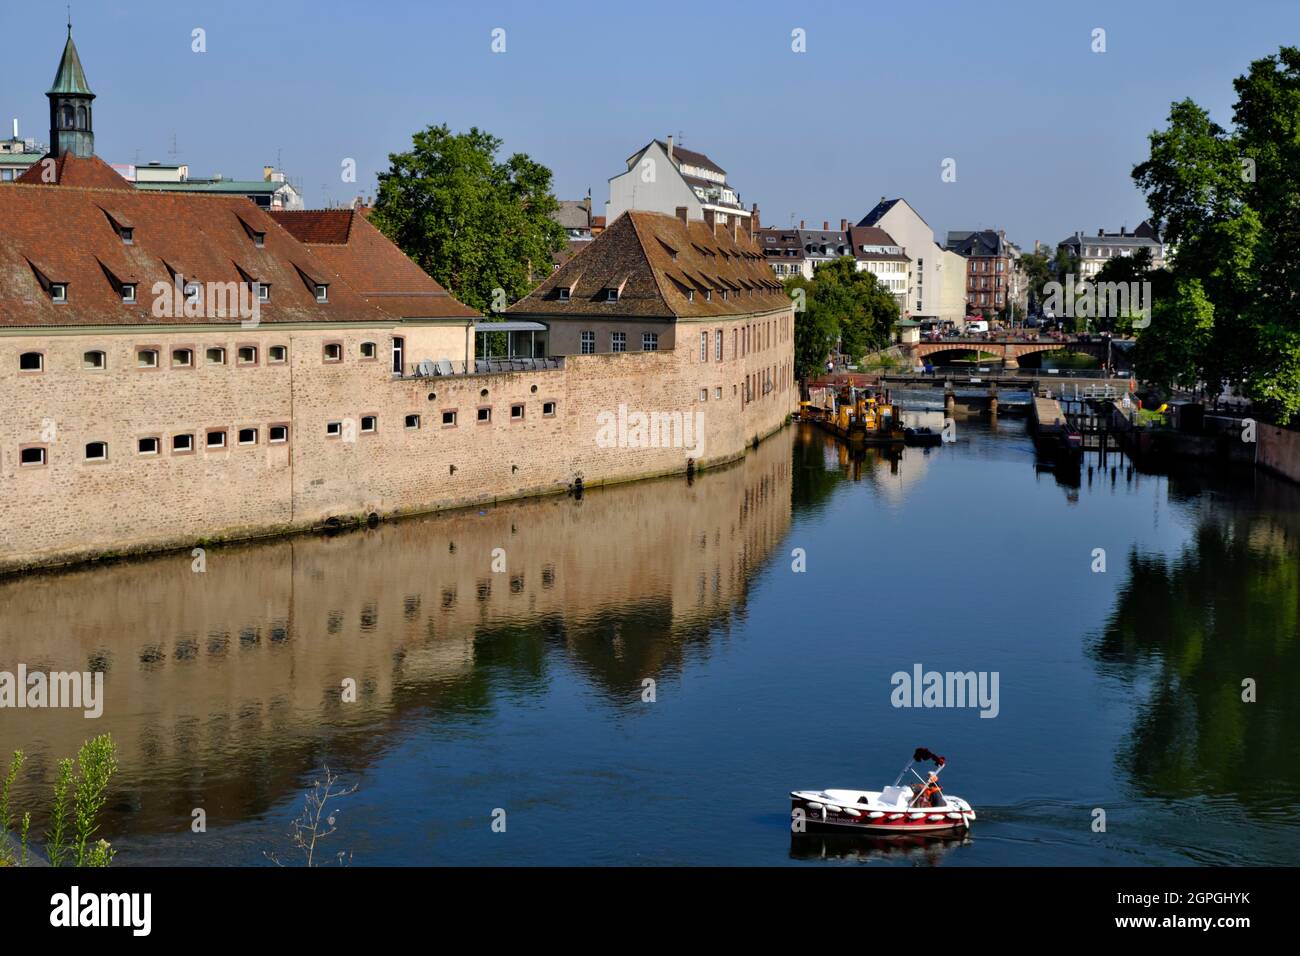 France, Bas Rhin, Strasbourg, old town listed as World Heritage by UNESCO, Vauban dam on the river Ill, former Commanderie Saint Jean, became National School of Administration Stock Photo